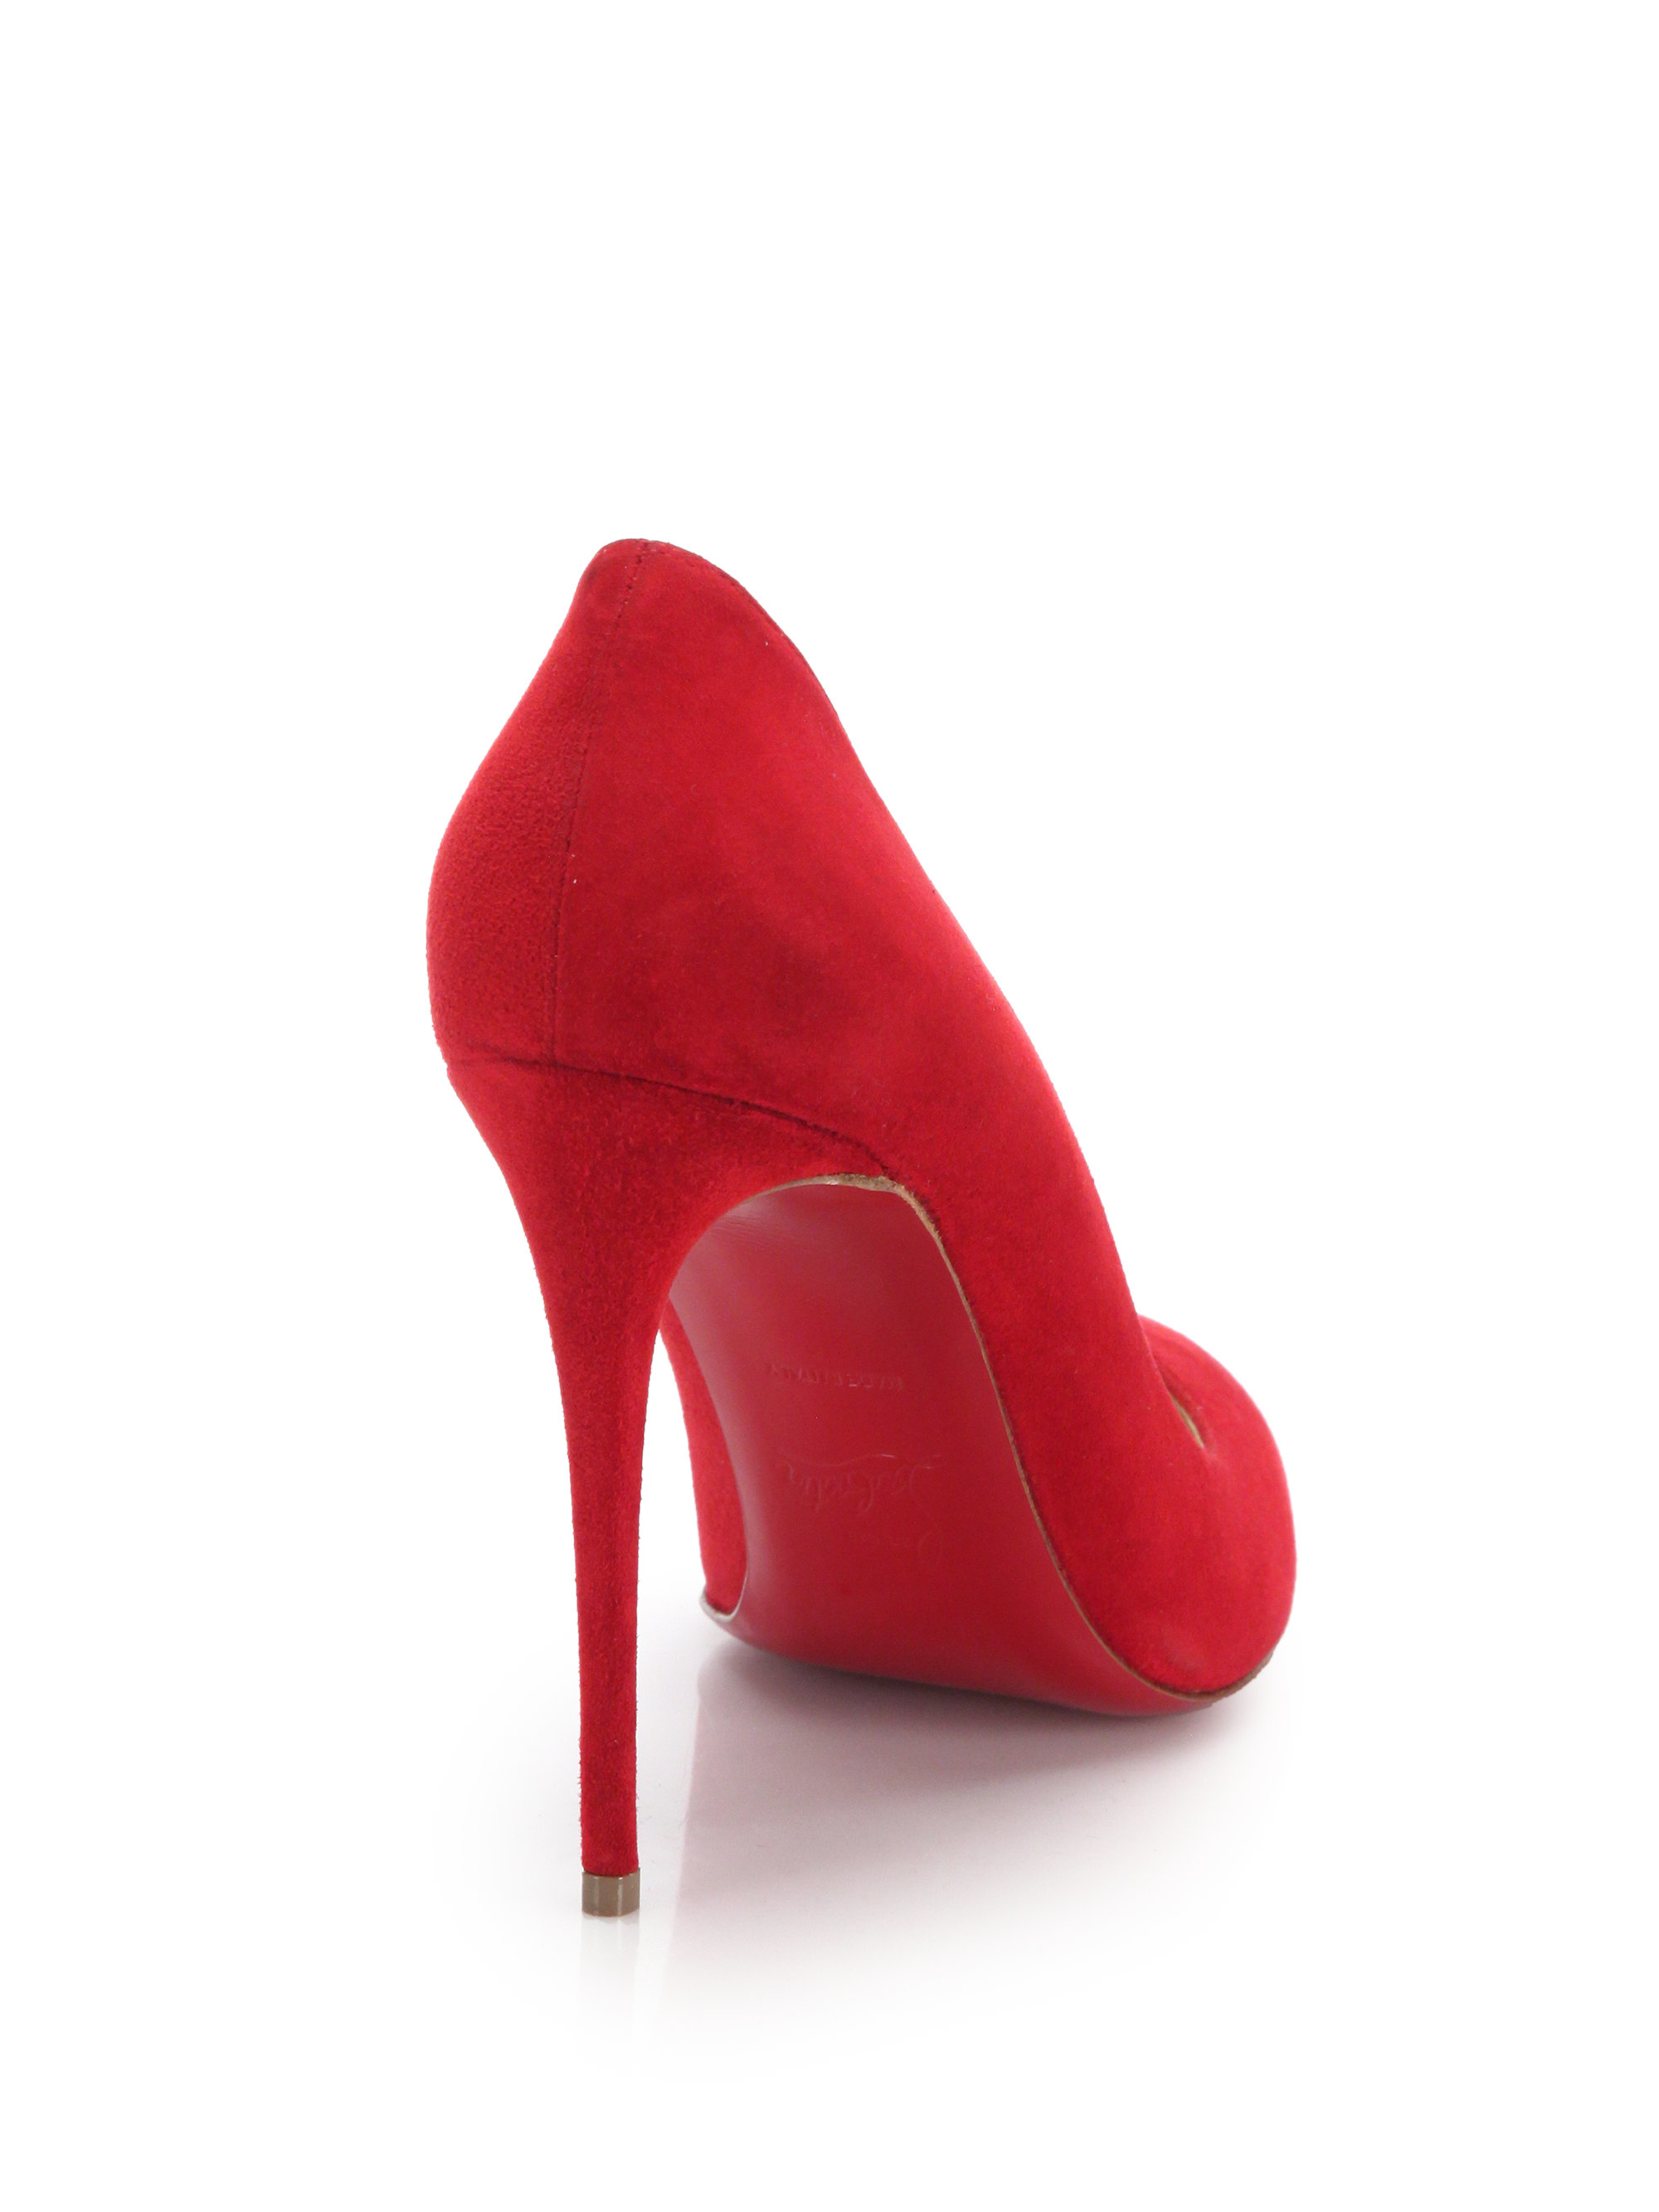 Christian louboutin Dorissima Suede Pumps in Red | Lyst  